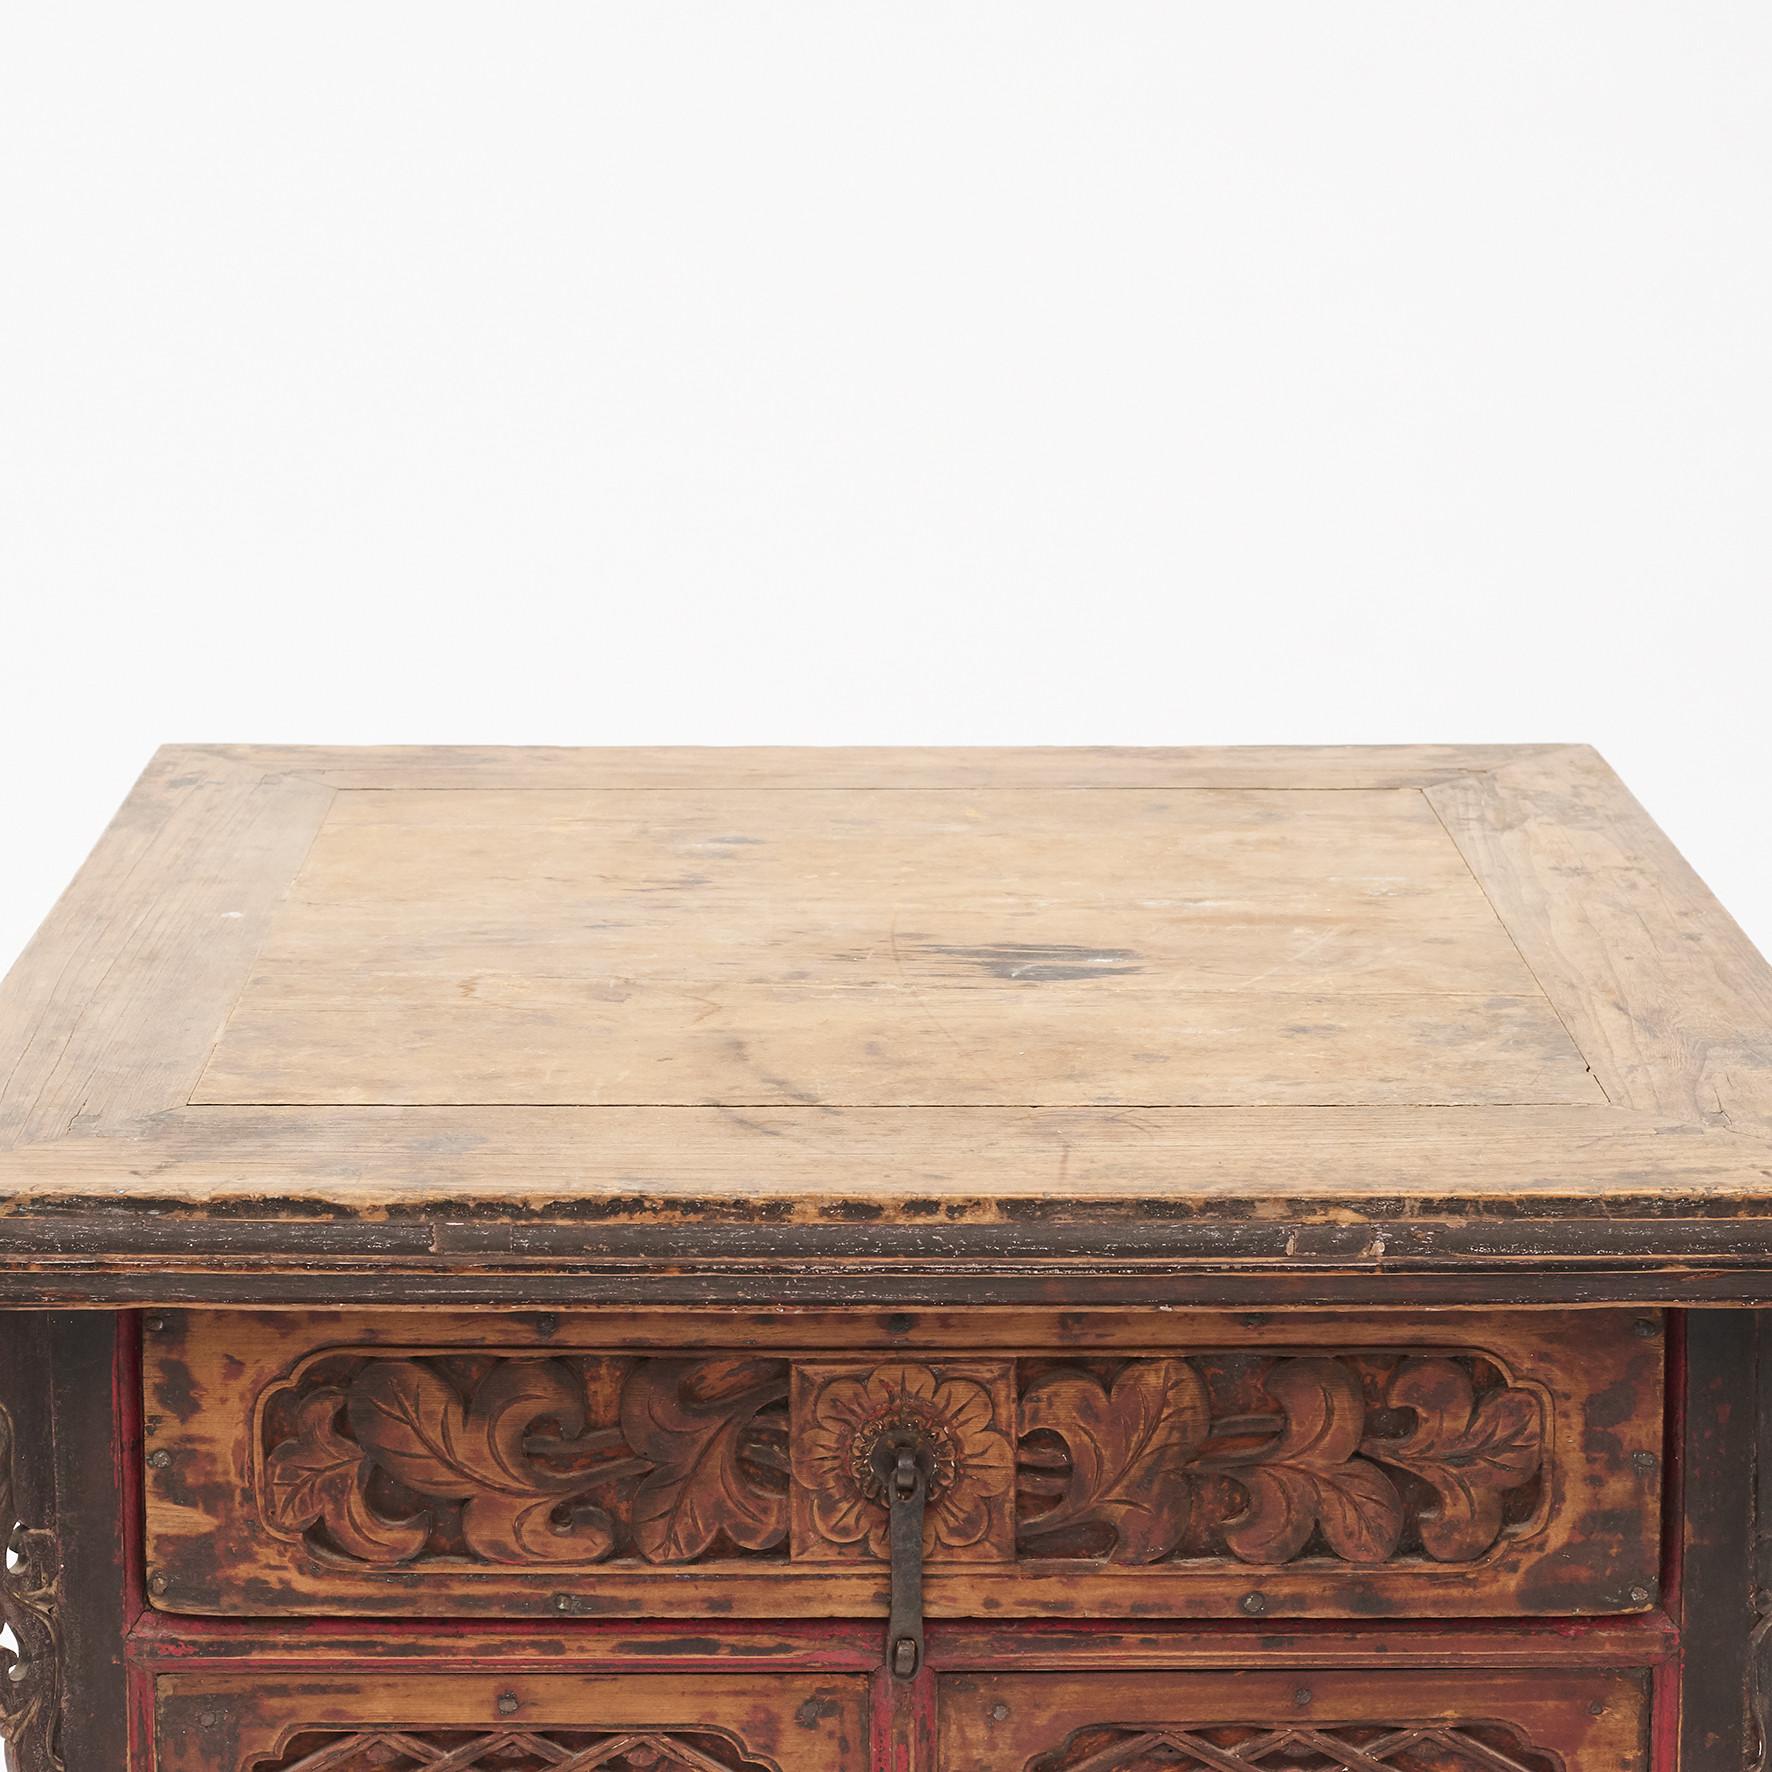 Elm 16th-17th Century Chinese Pine Center Table with Carvings and Decorations For Sale